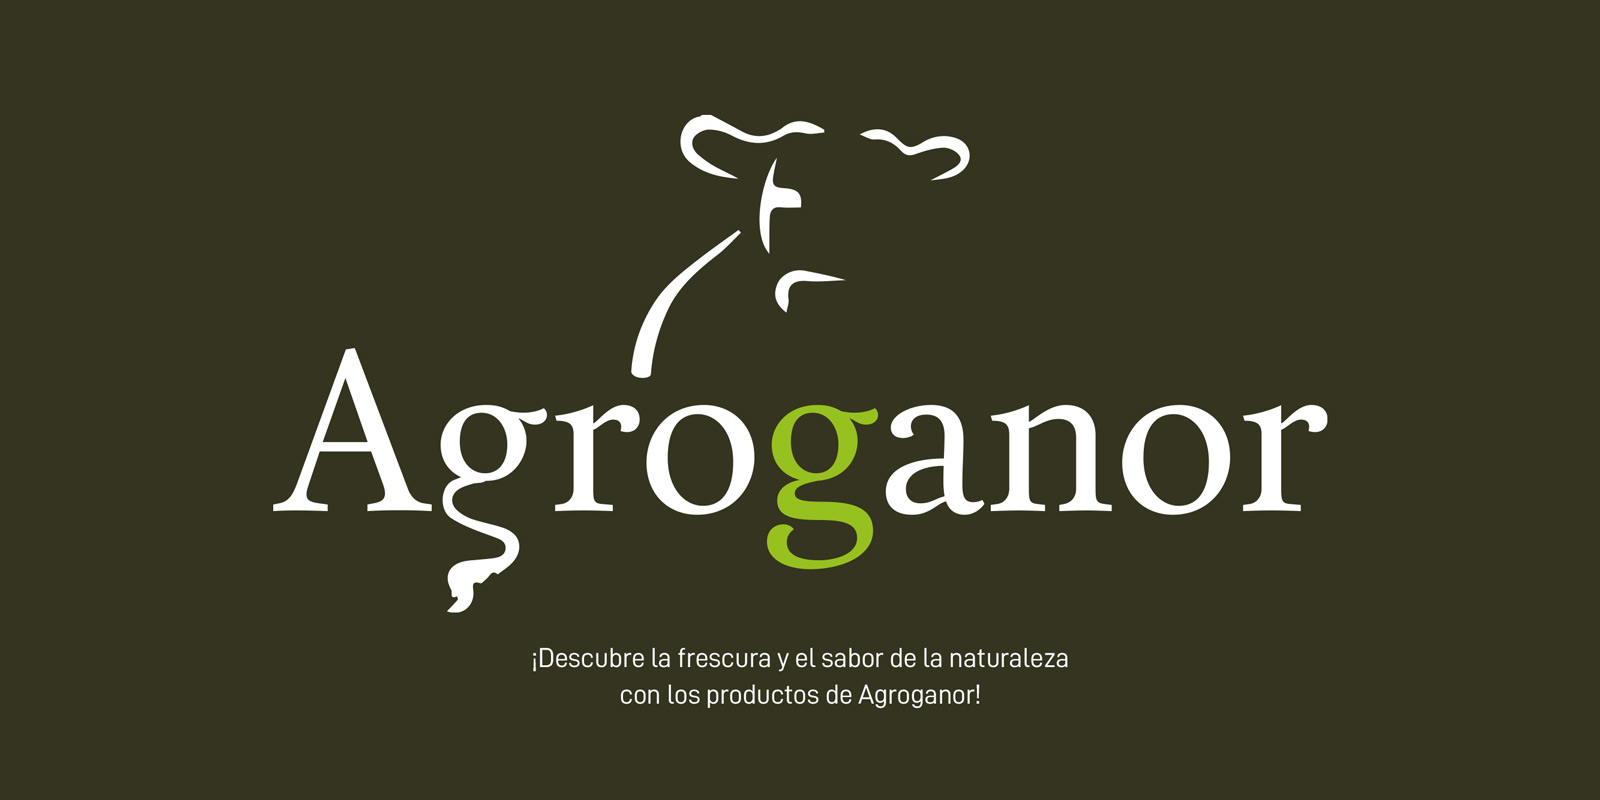 Portfolio of logo and brand creation design jobs for agriculture and livestock companies